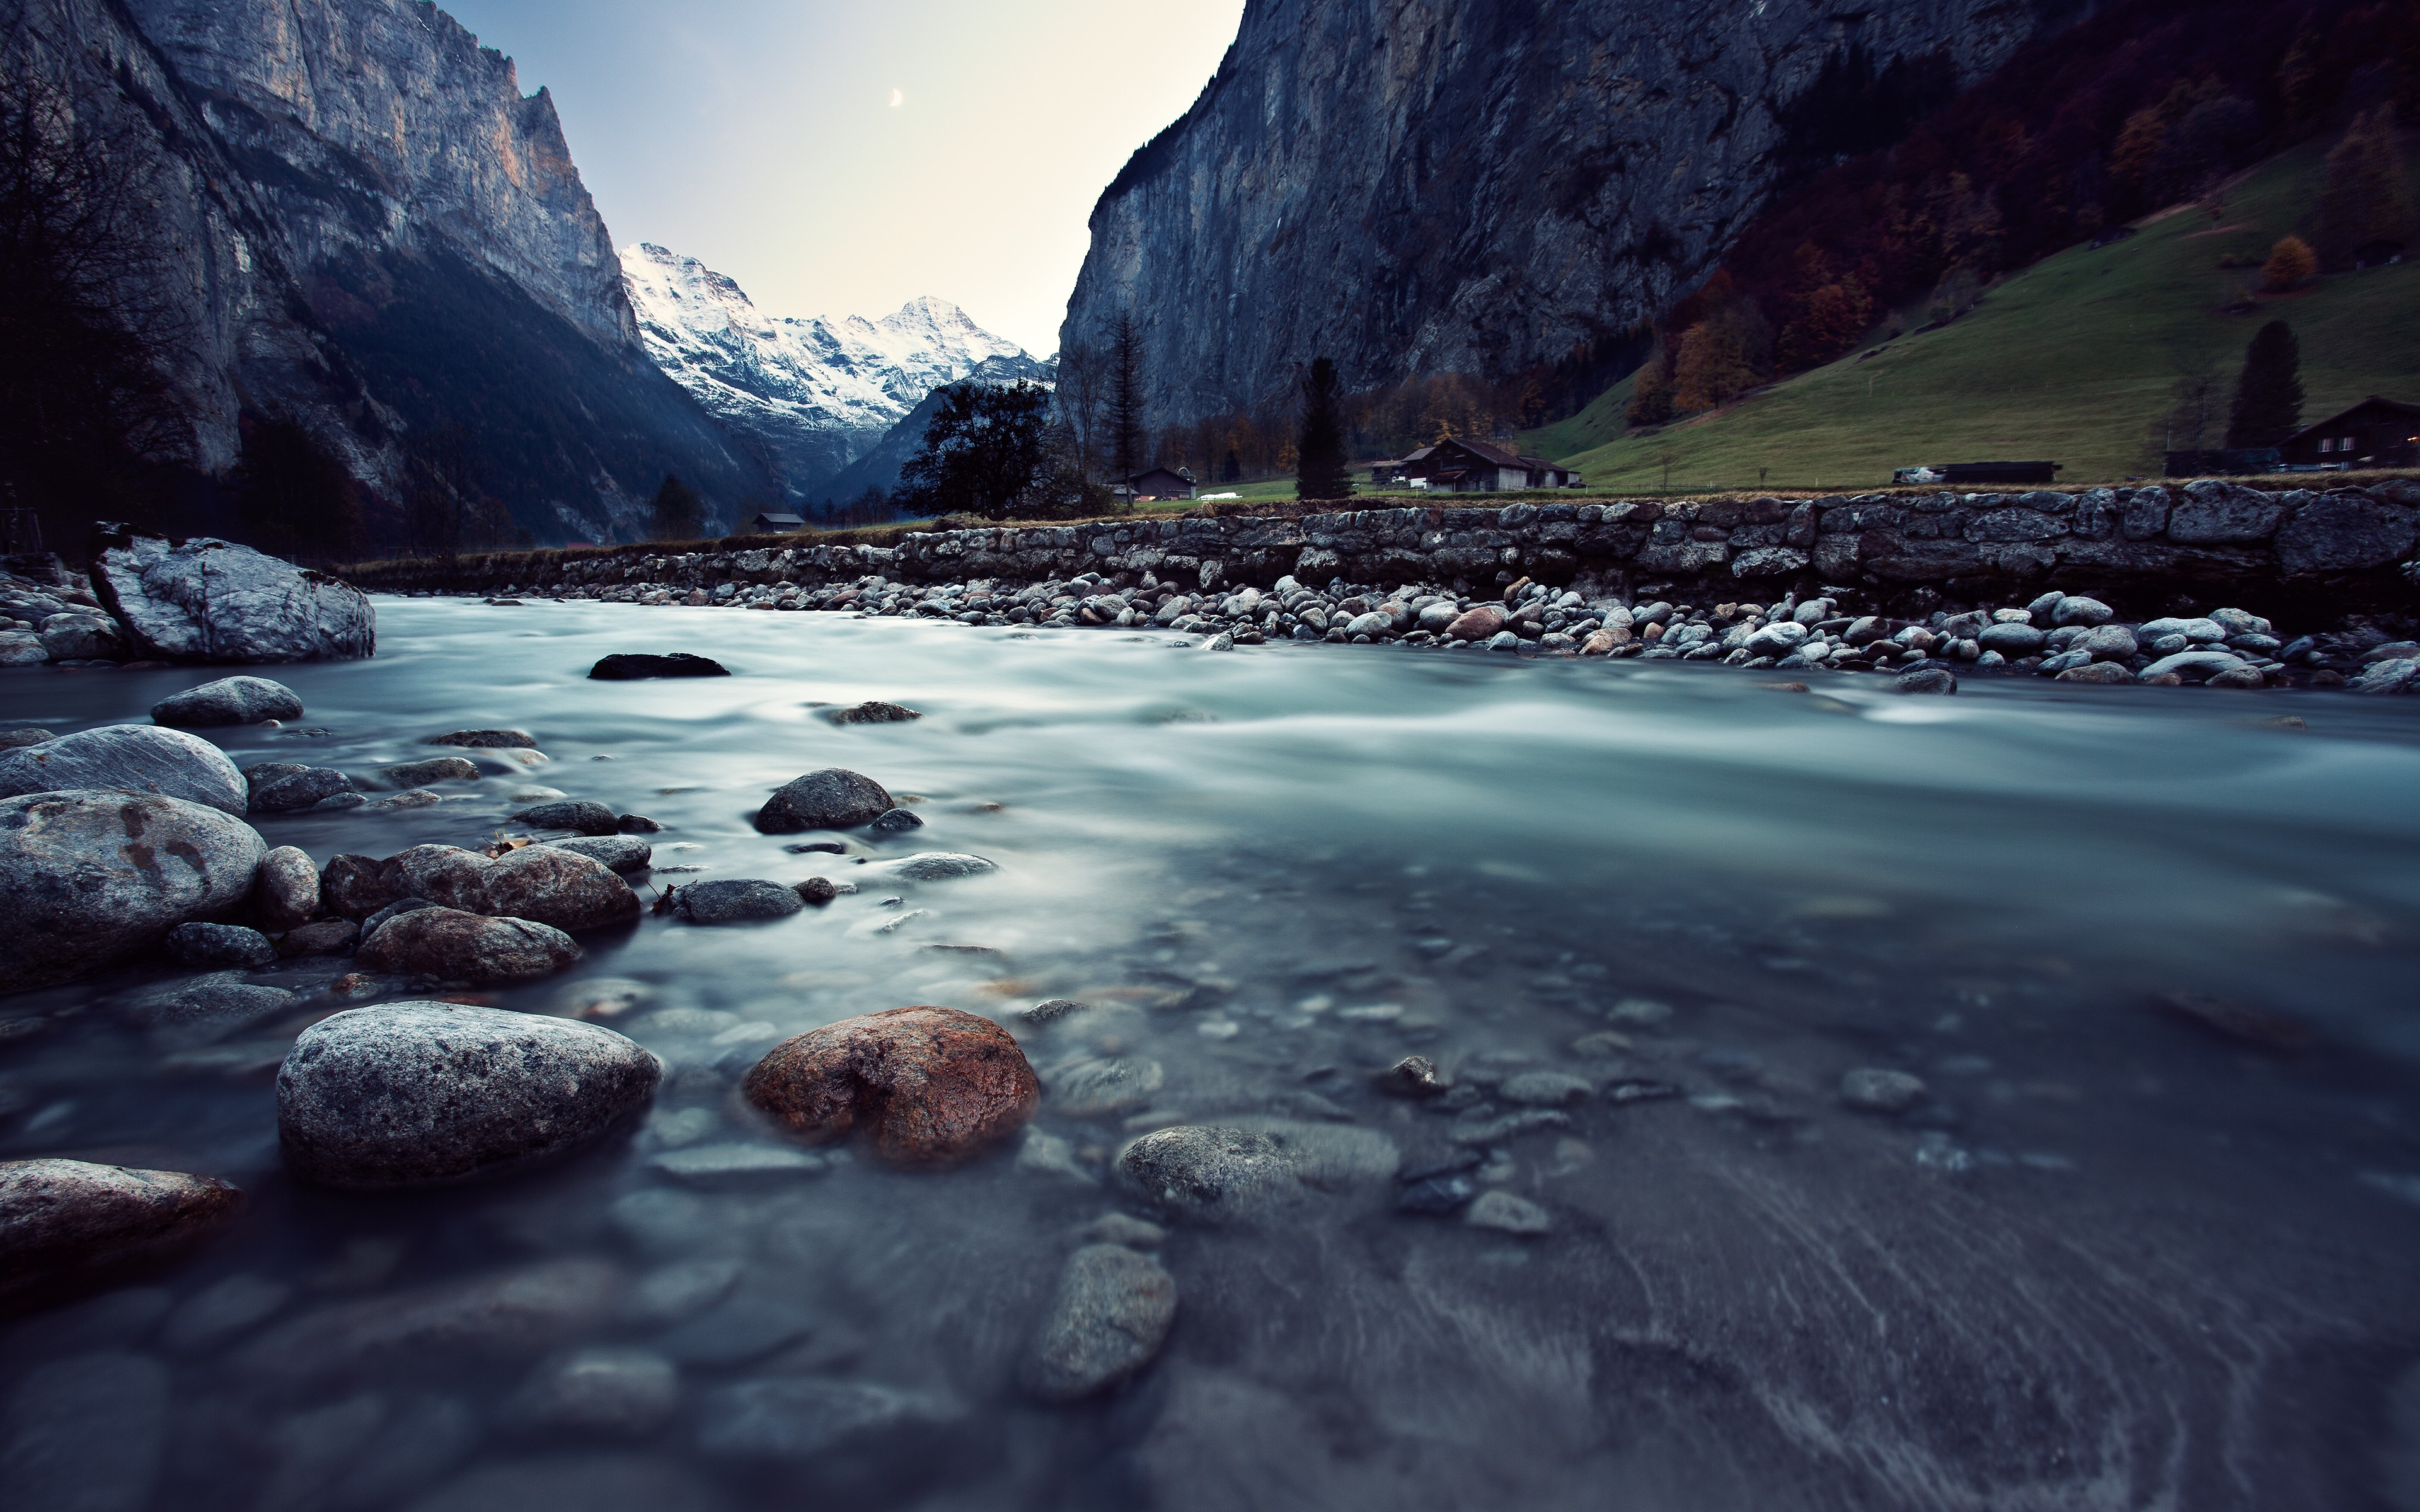 General 3840x2400 sky lake water nature mountains Switzerland creeks river rocks trees landscape stones snow snowy mountain long exposure